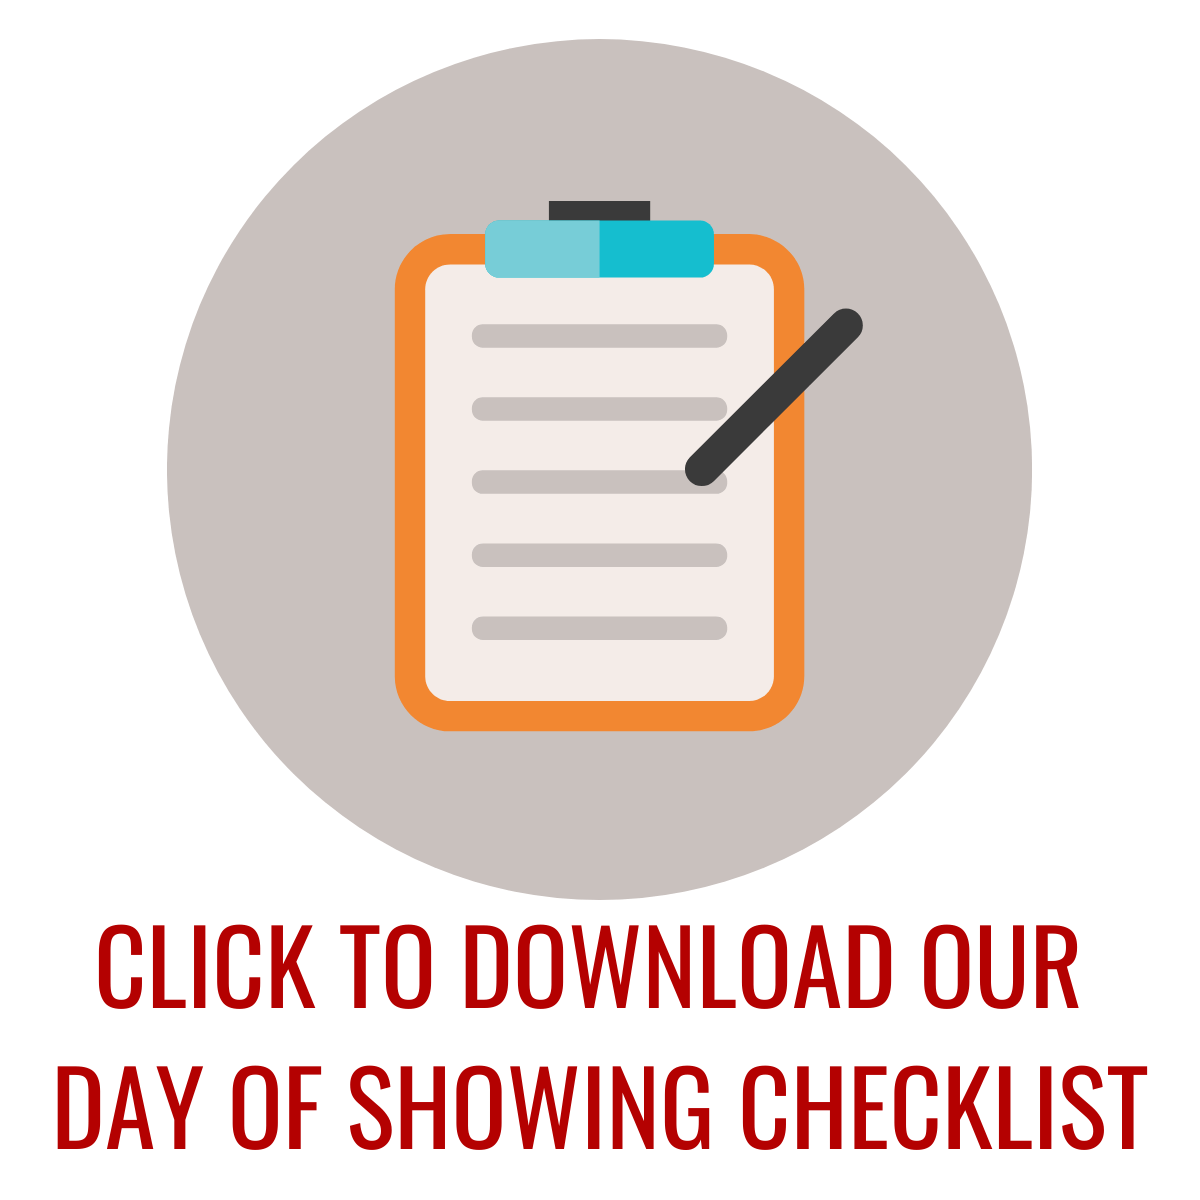 Download Checklist for Day of Showing